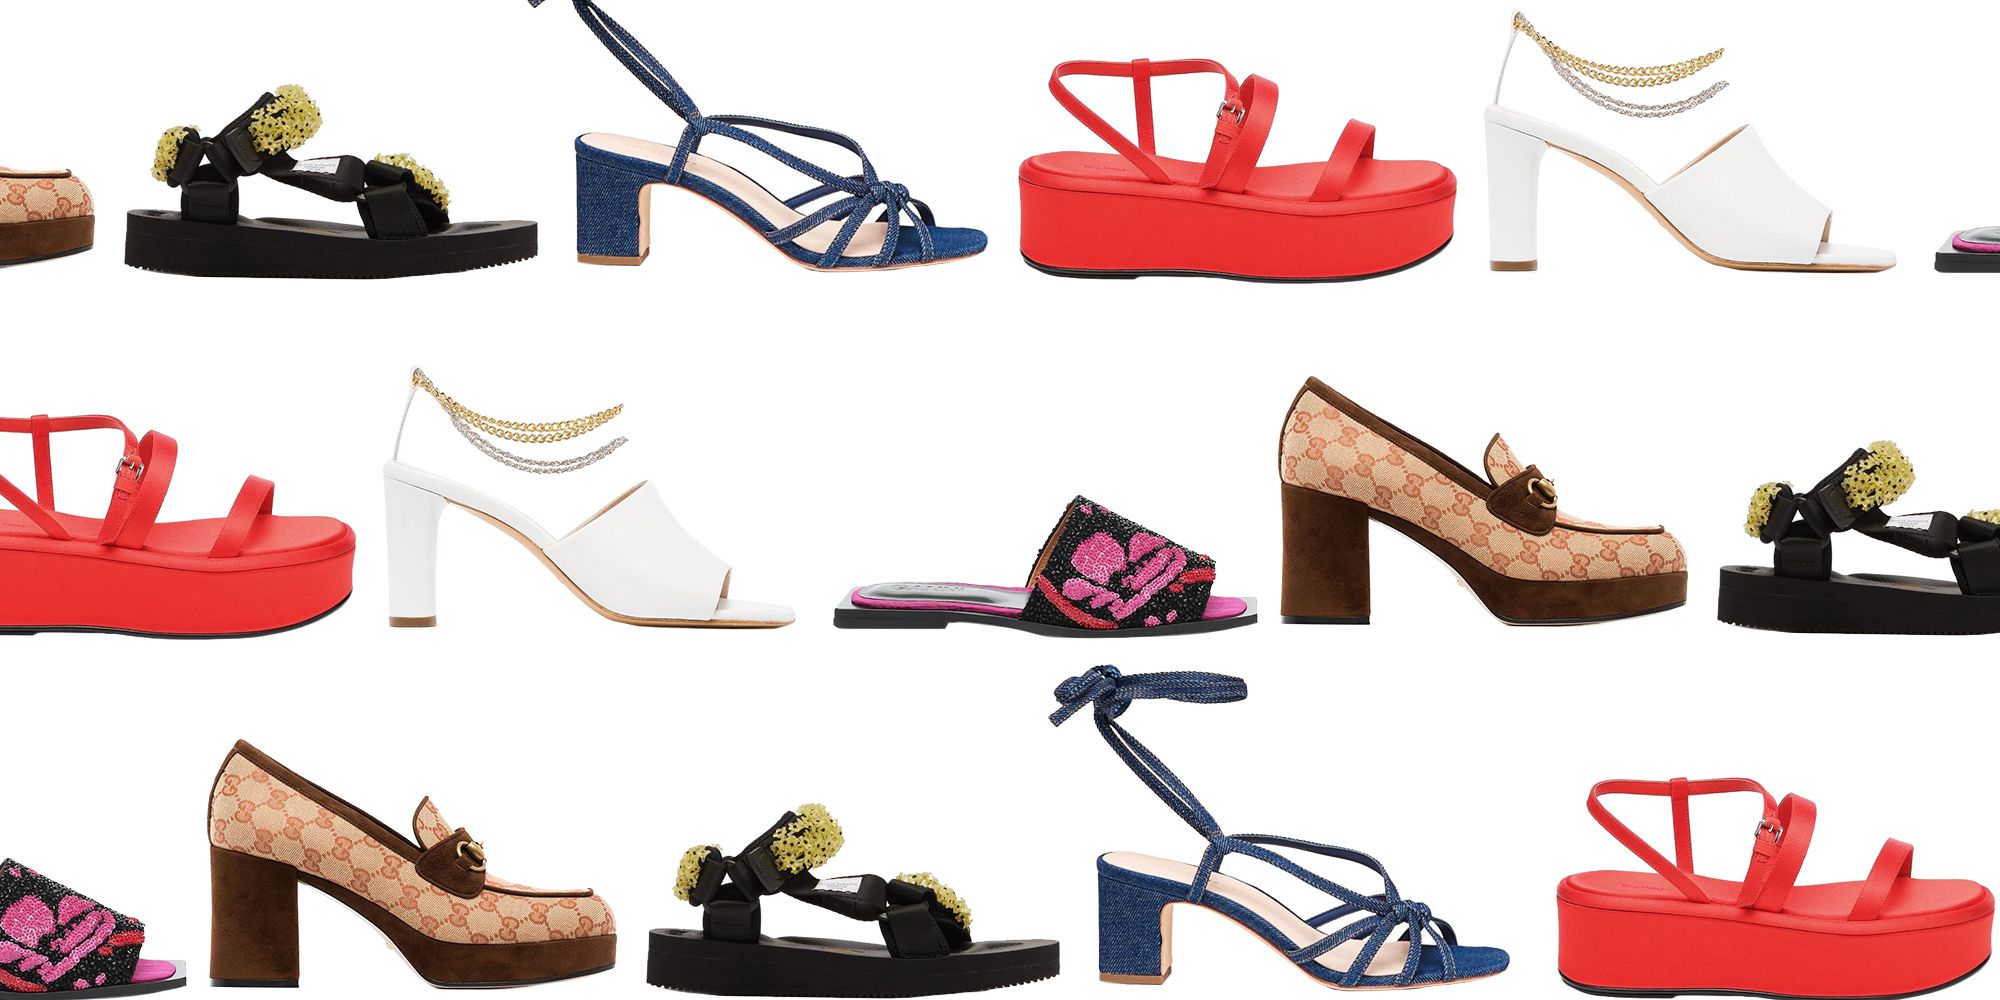 Square Toe Shoes Ideas For Summer